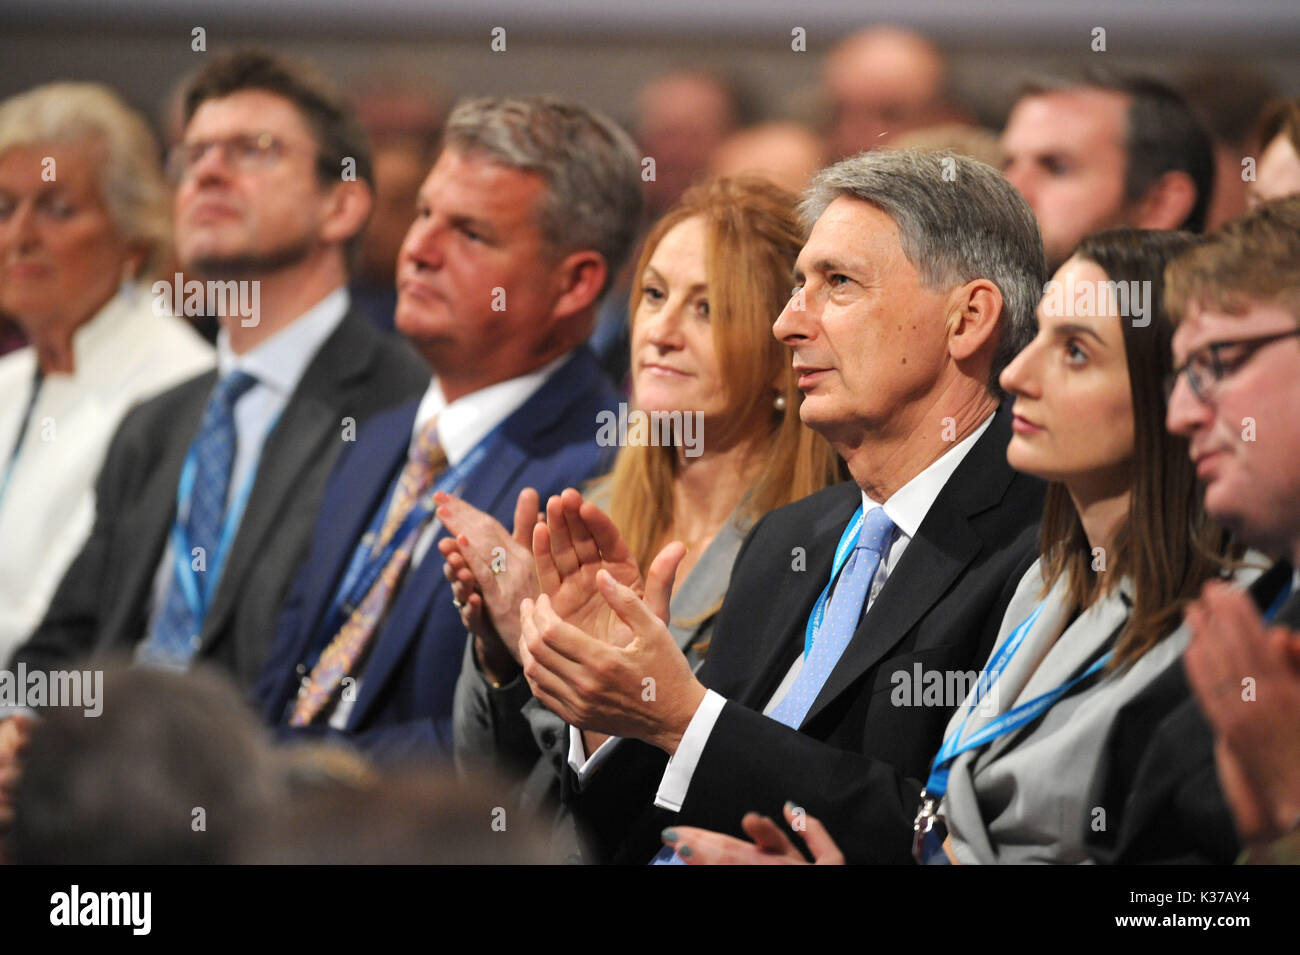 Photo Must Be Credited ©Alpha Press 079965 02/10/2016 Susan Hammond and Philip Hammond Conservative Party Conference 2016 At The Birmingham ICC Stock Photo